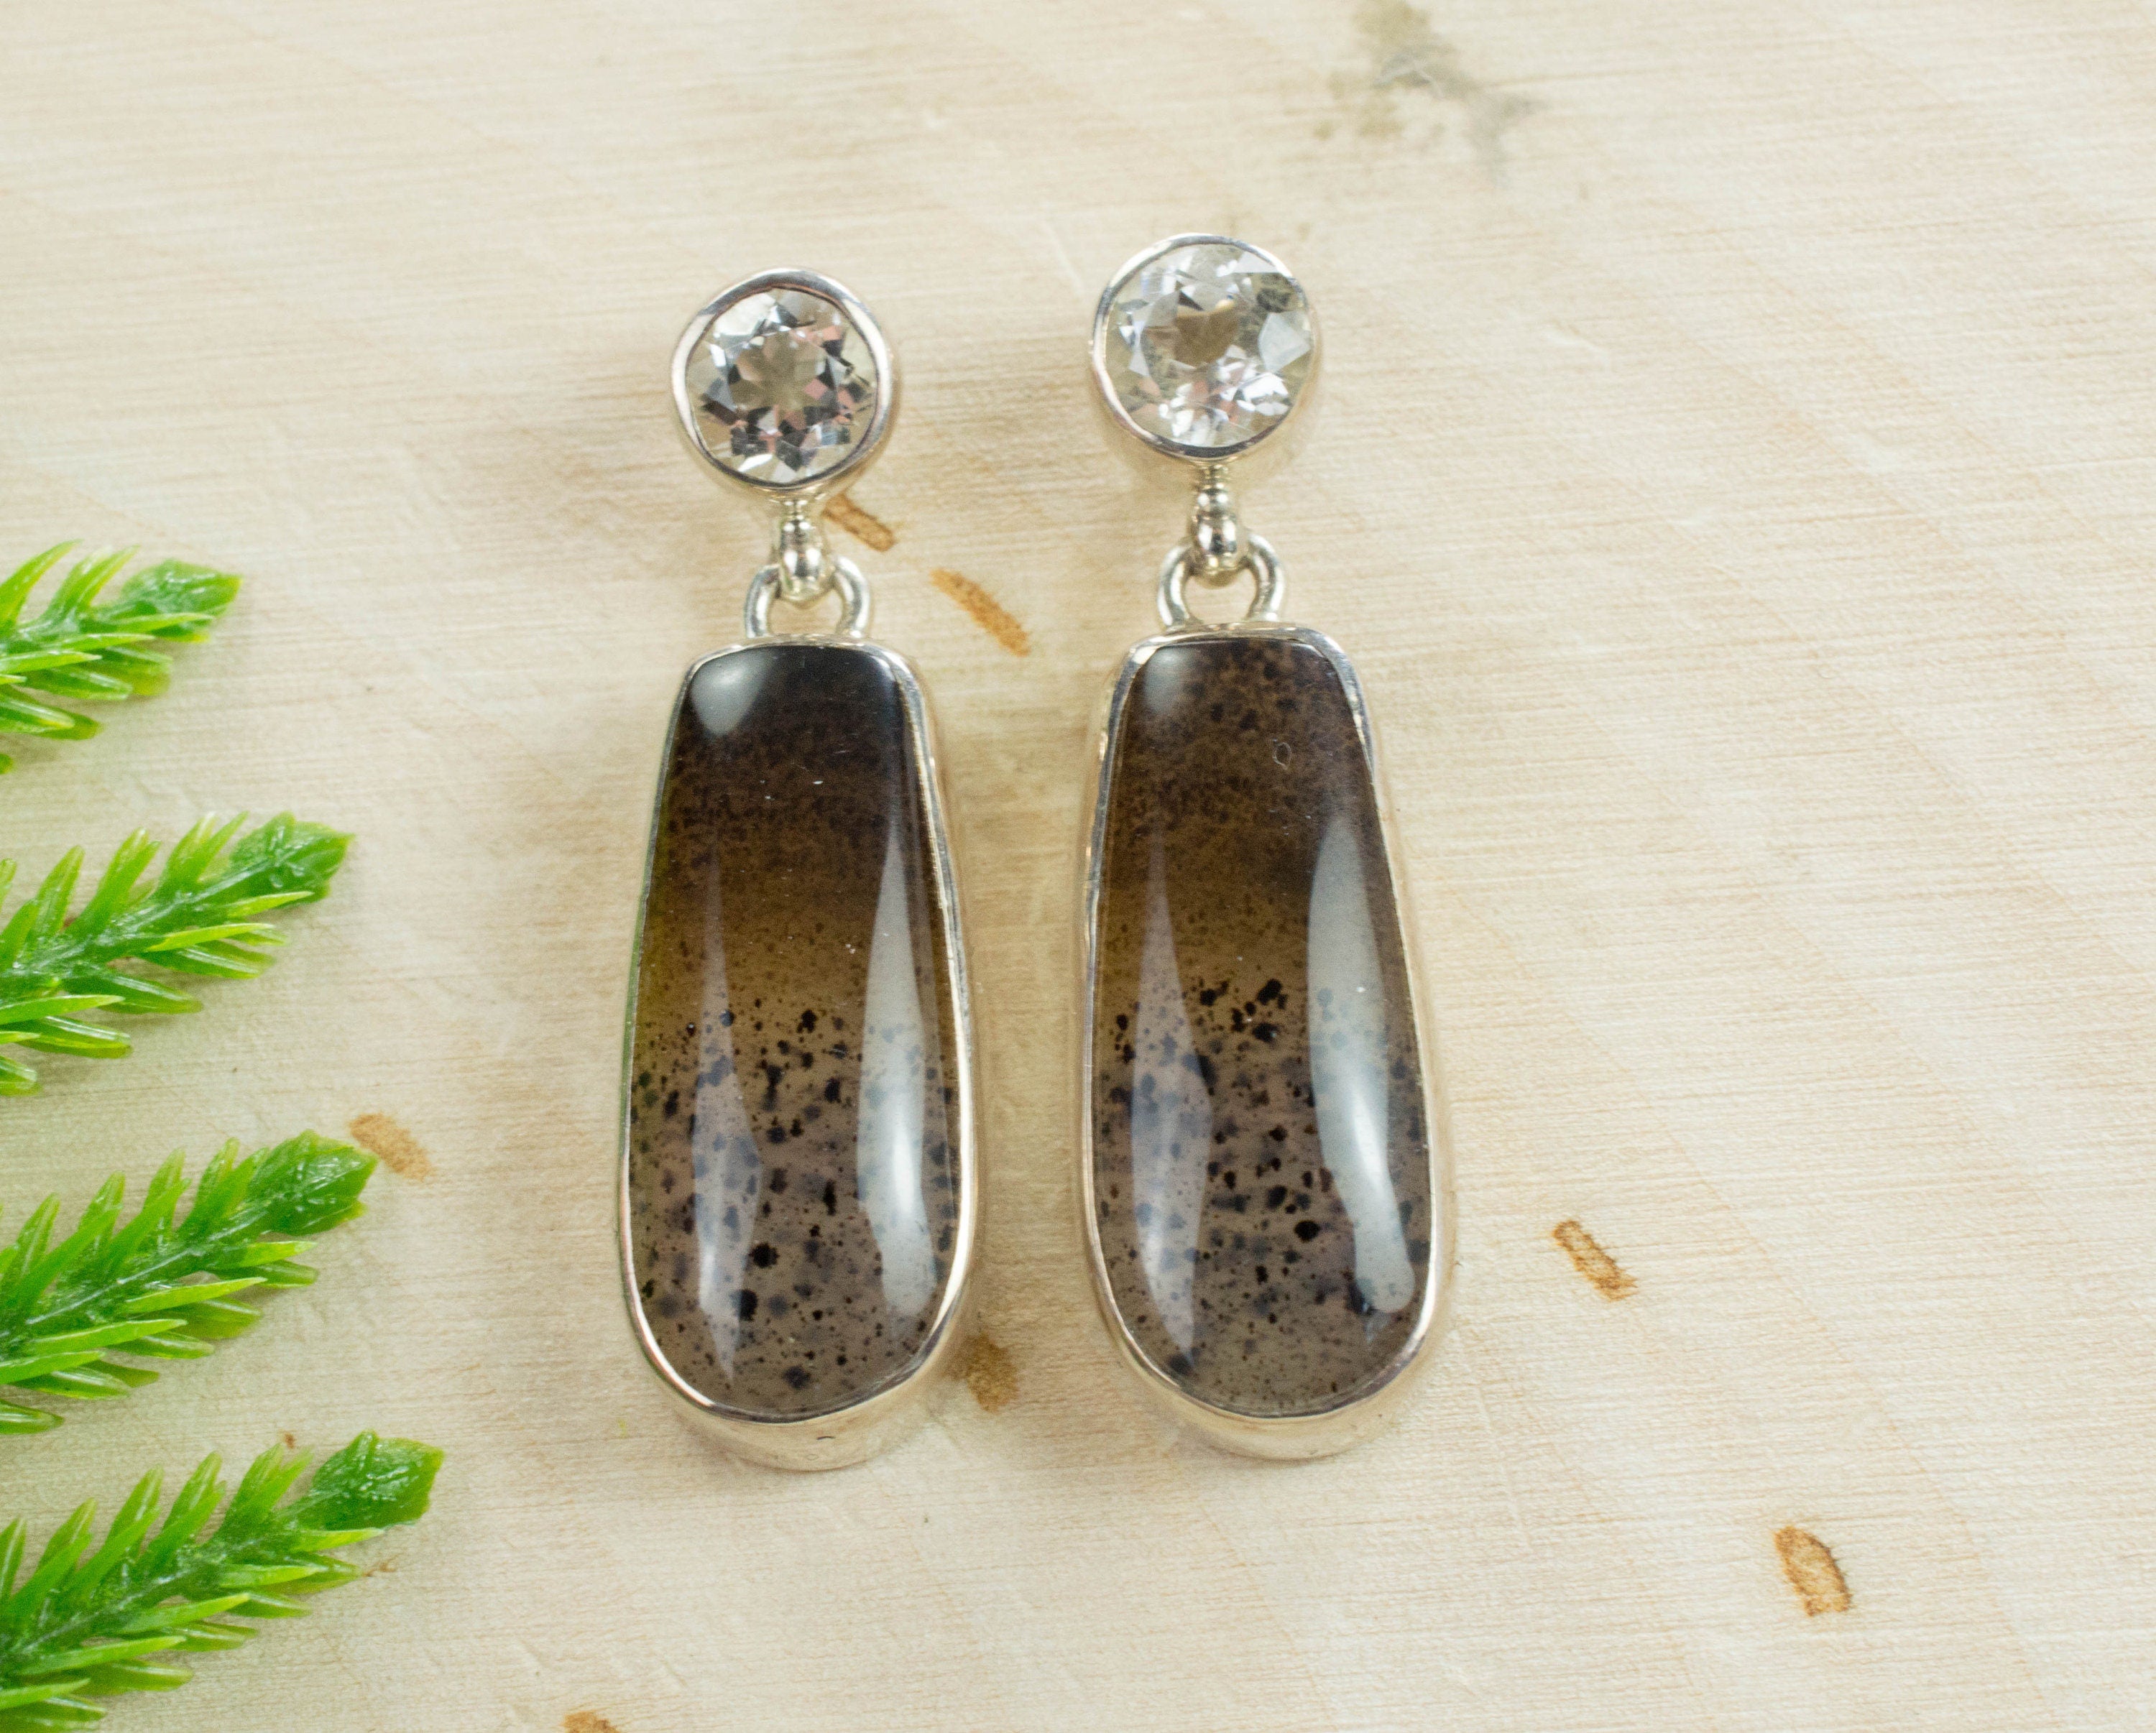 Montana Moss Agate and Quartz Sterling Silver Earrings, Genuine Untreated Agate; Agate Earrings - Mark Oliver Gems